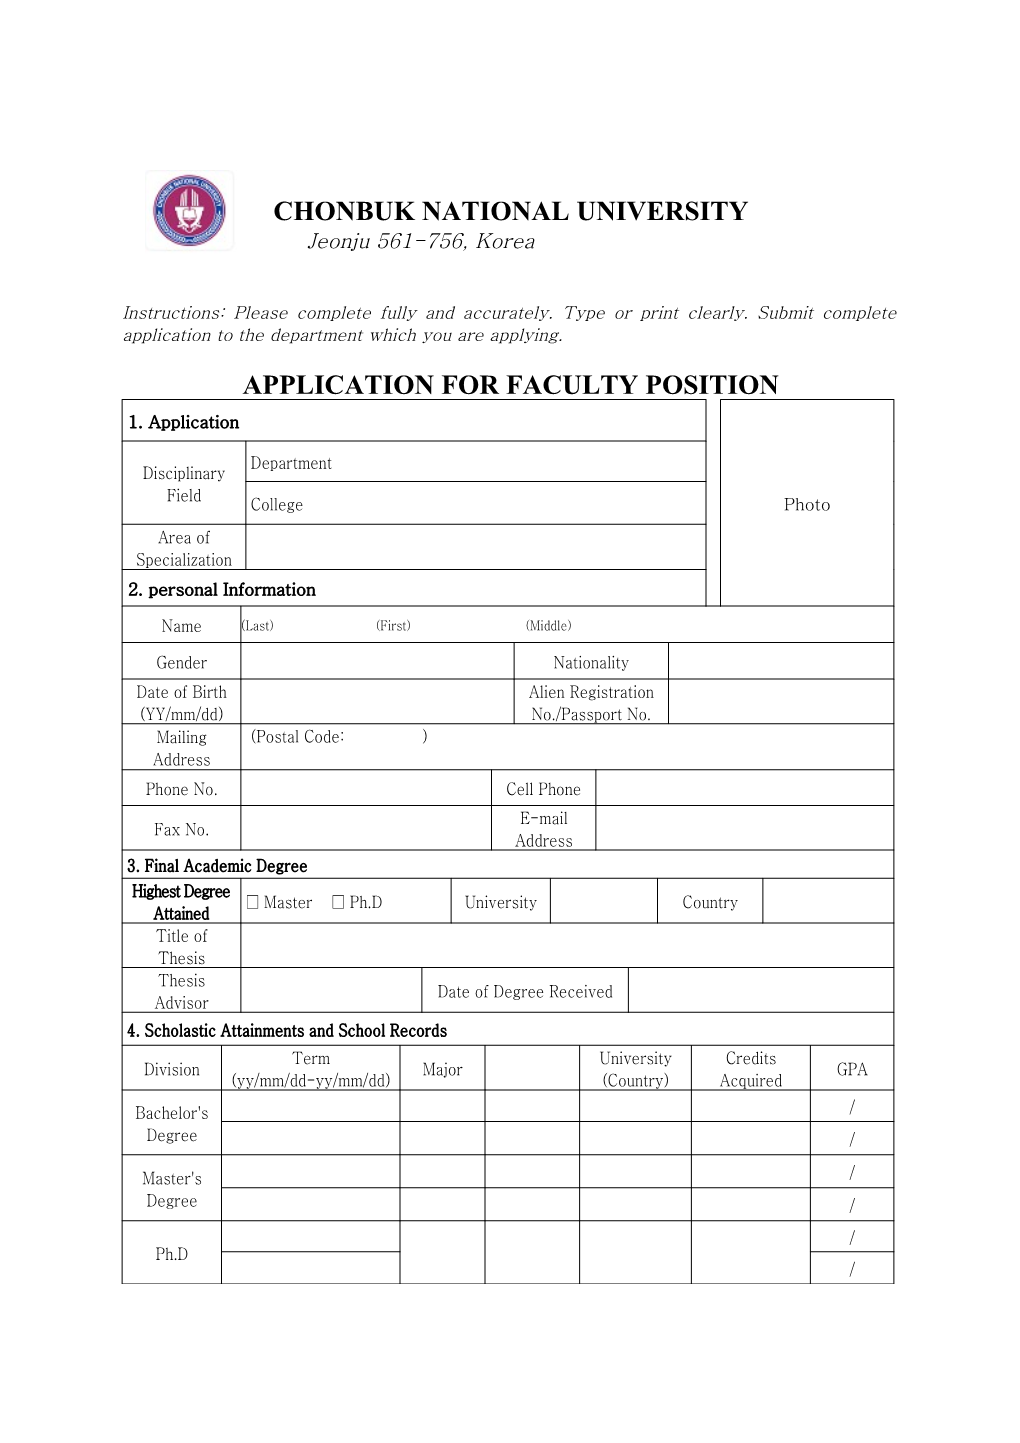 Application for Faculty Position